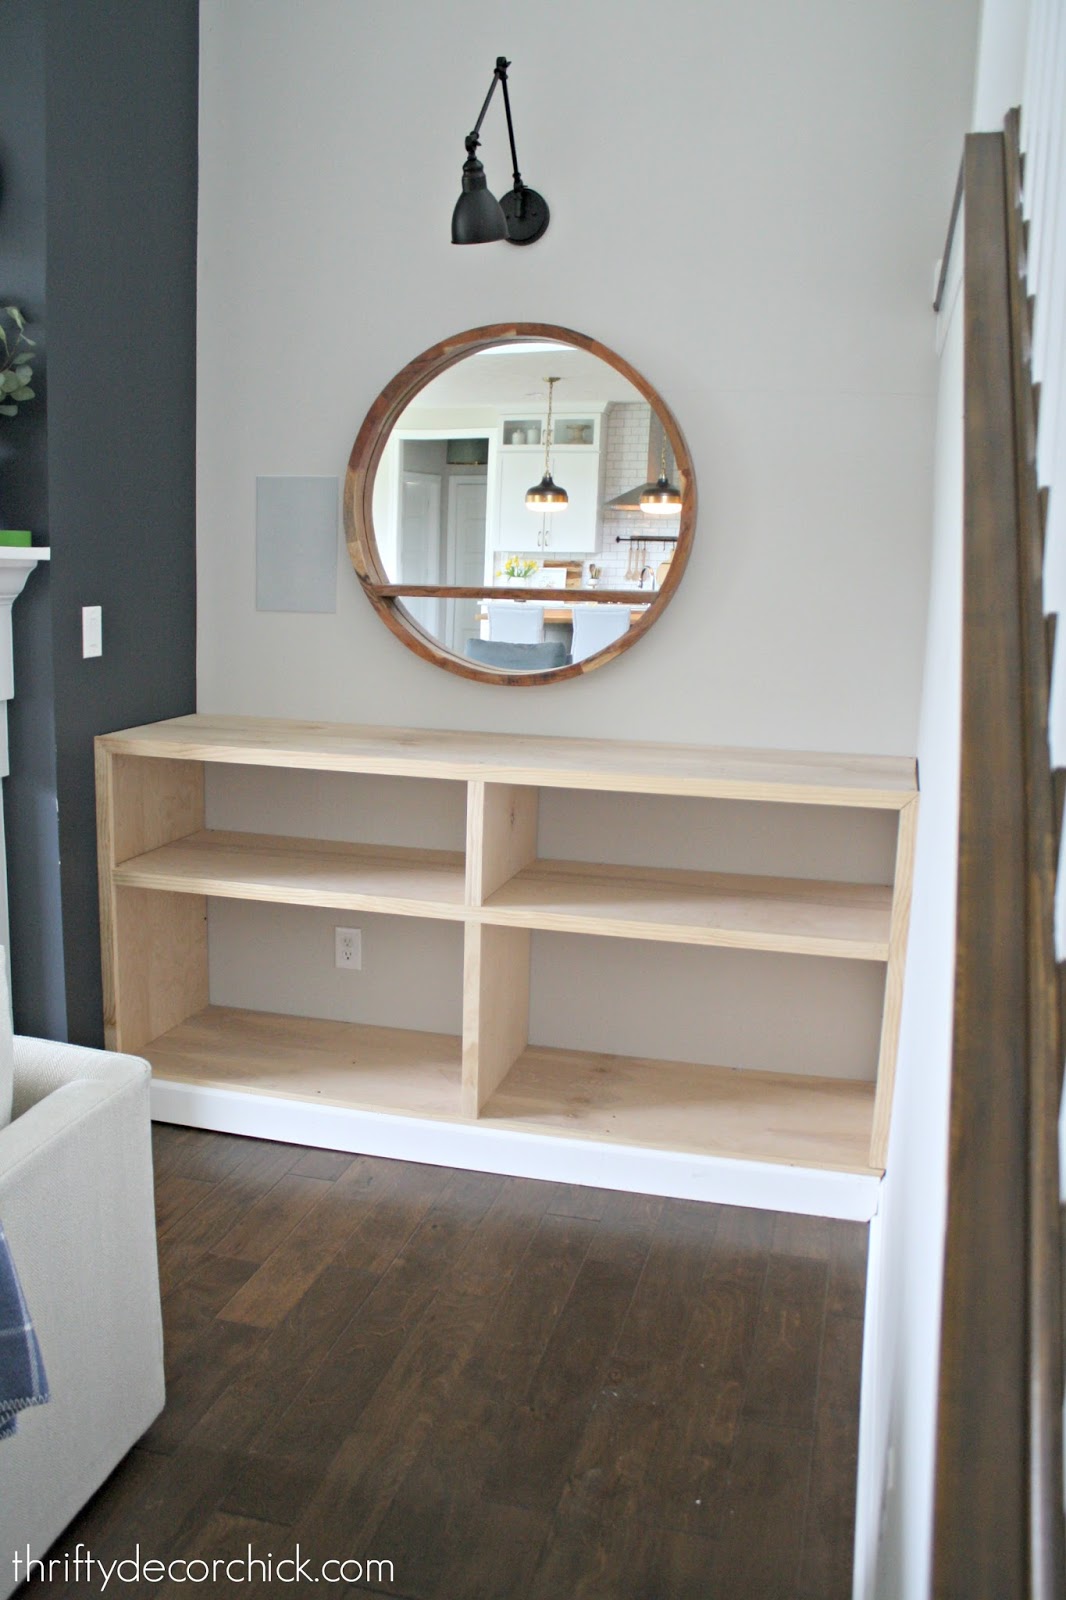 Diy Bookcases By The Fireplace, How To Build Bookcase Around Fireplace